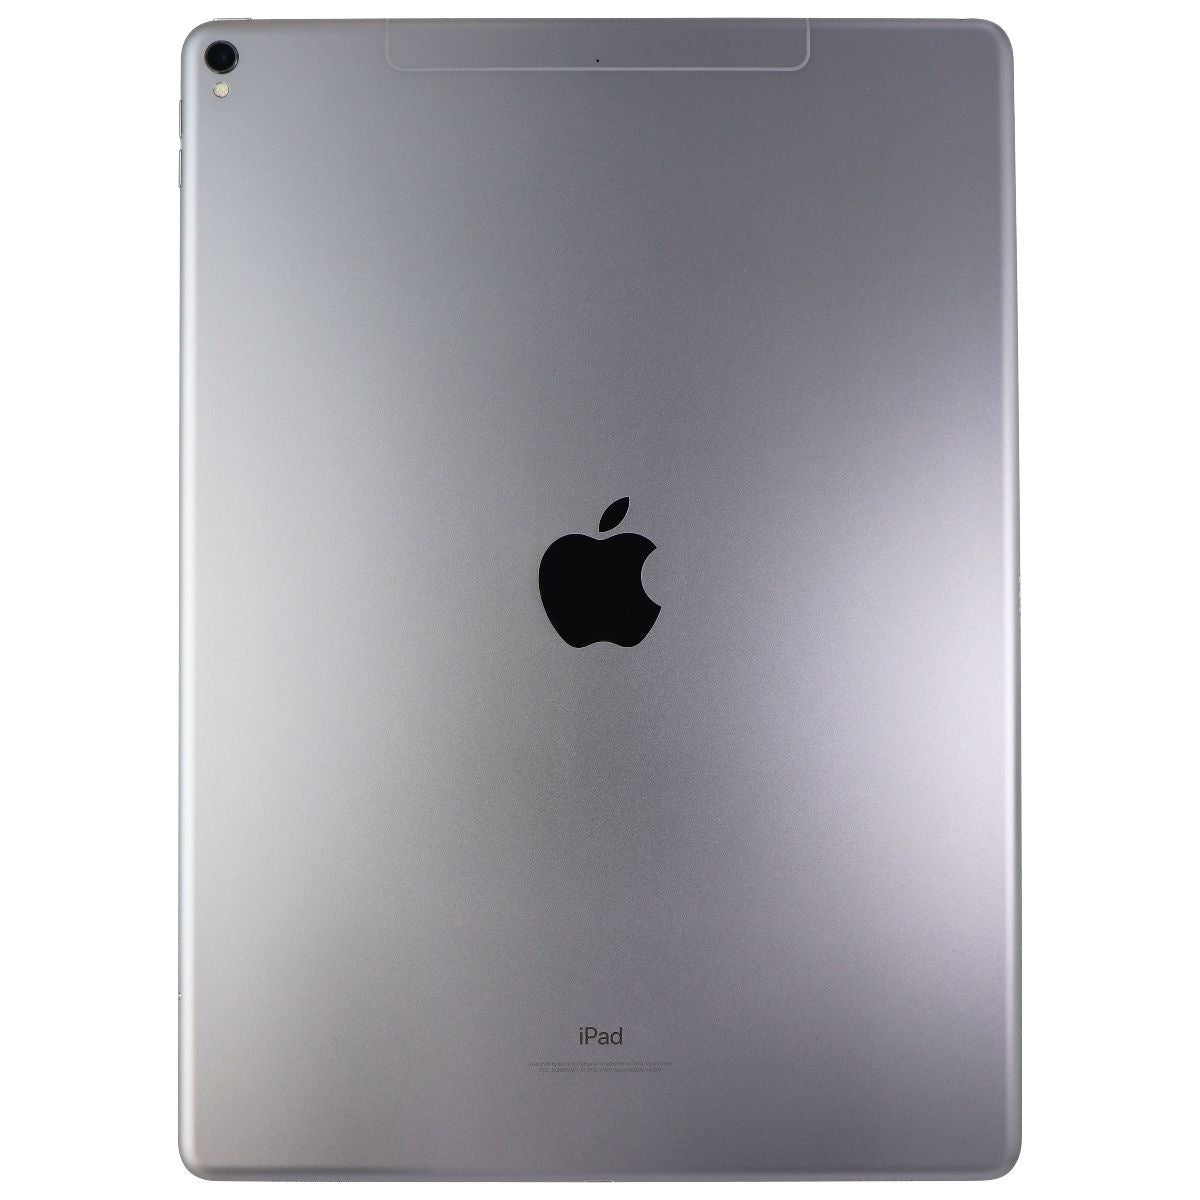 Apple iPad Pro 12.9-inch (2nd Gen) Tablet (A1671) GSM + CDMA - 512GB/Space Gray iPads, Tablets & eBook Readers Apple    - Simple Cell Bulk Wholesale Pricing - USA Seller